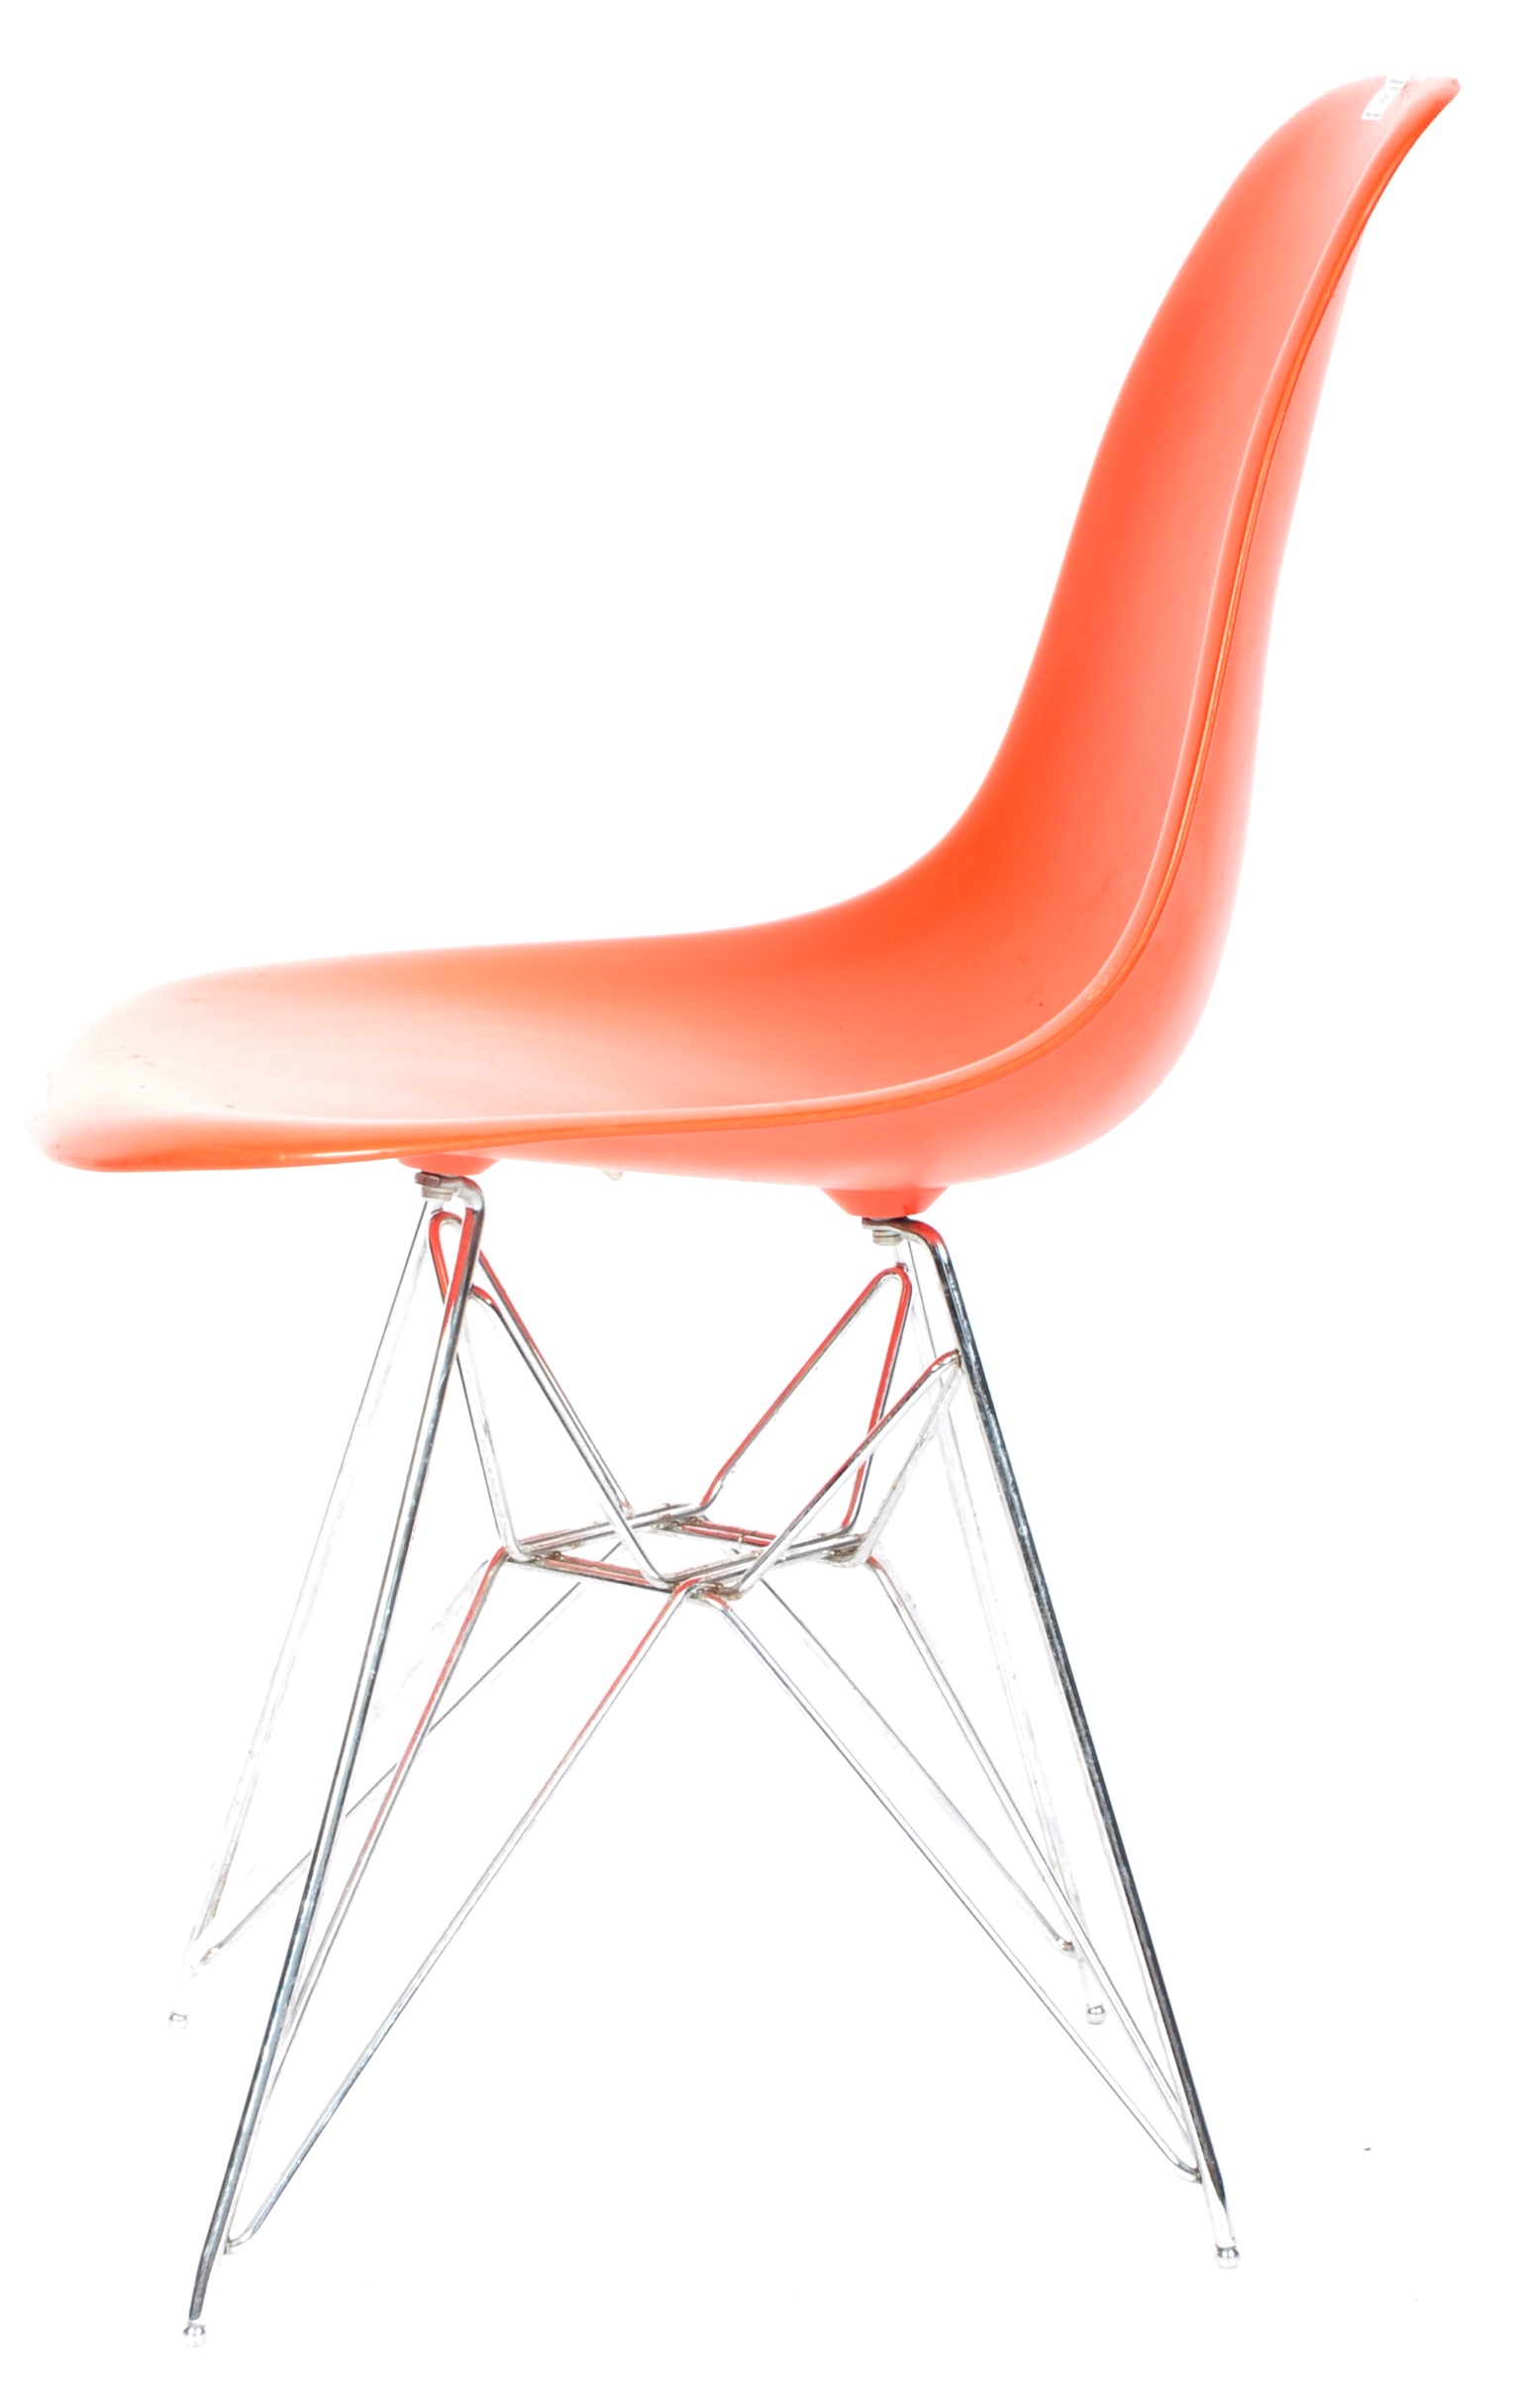 CHARLES & RAY EAMES FOR VITRA - DSR EAMES PLASTIC CHAIR - Image 6 of 10